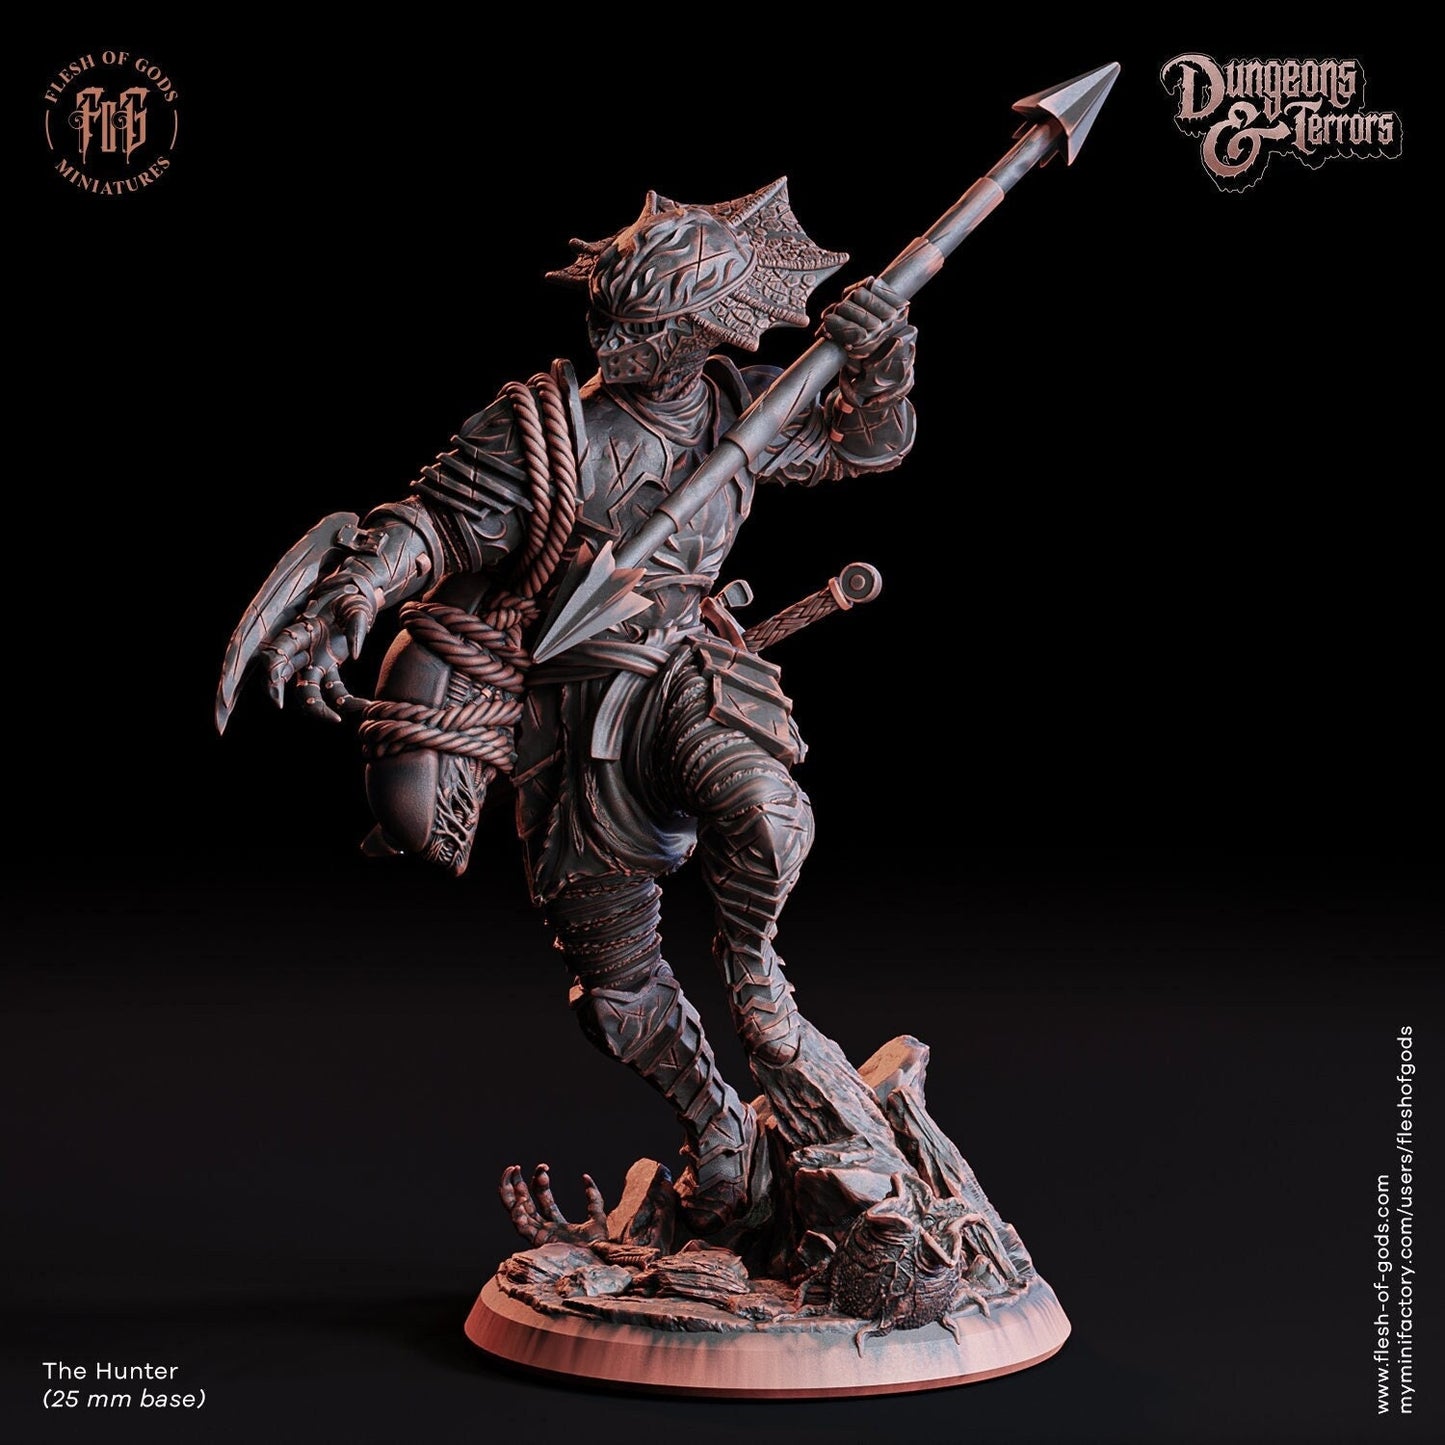 The Hunter | Flesh of Gods | Enemy | 3D Printed Resin Miniature | Dungeons and Dragons | Pathfinder | Tabletop Role Playing | D&D